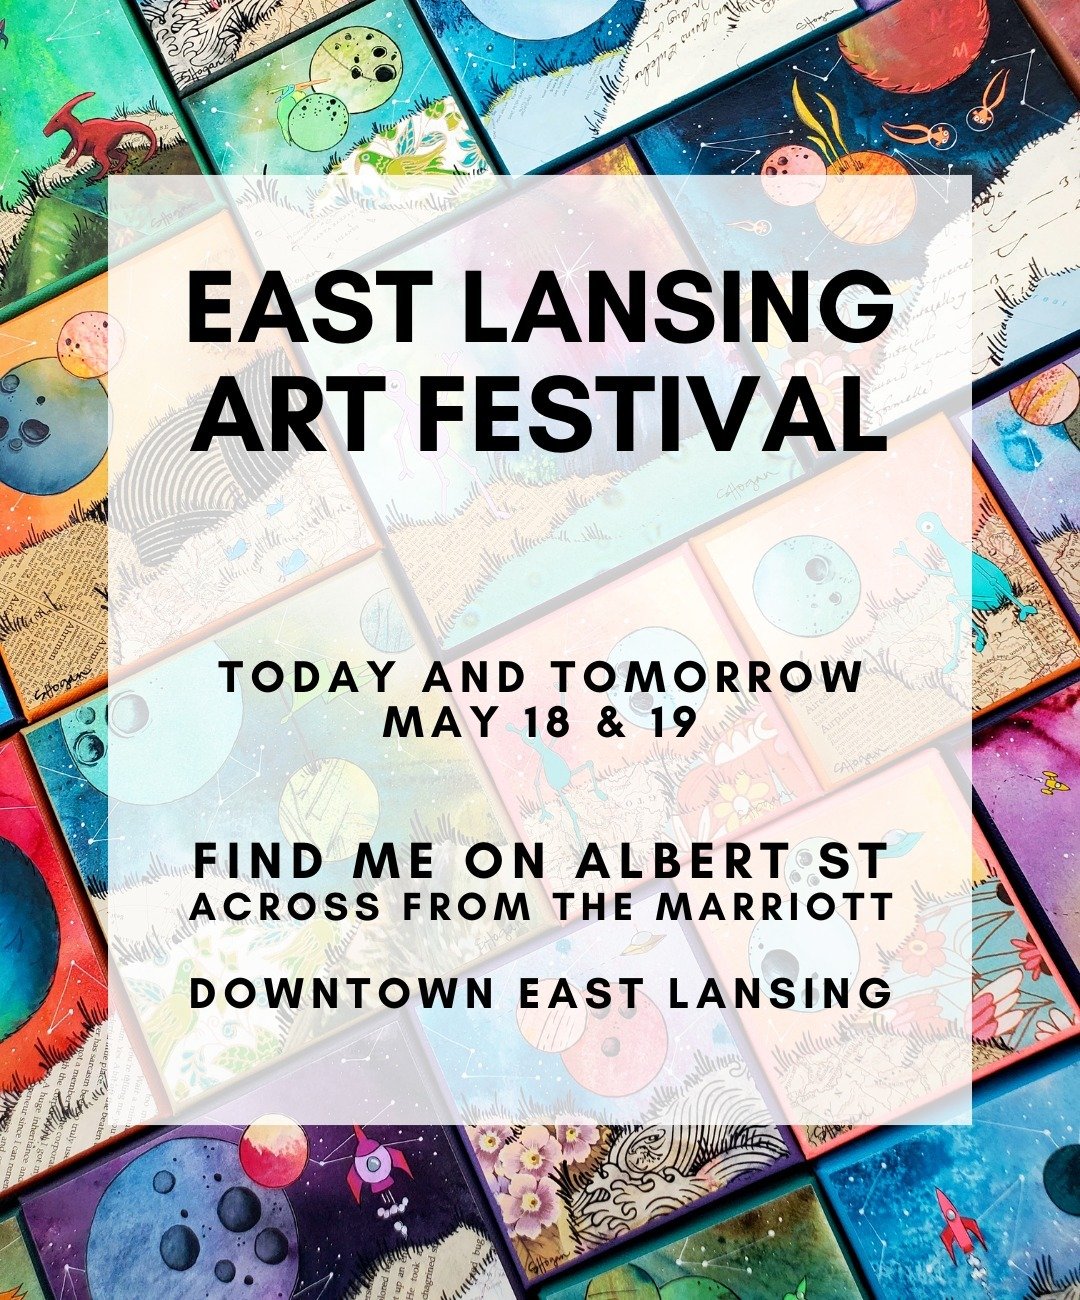 Today and tomorrow! East Lansing Art Festival - lots of new work I'm excited to share!  Find me on Albert Street, across from the Marriott (same place as last year).⁠
⁠
Can't wait to see you!